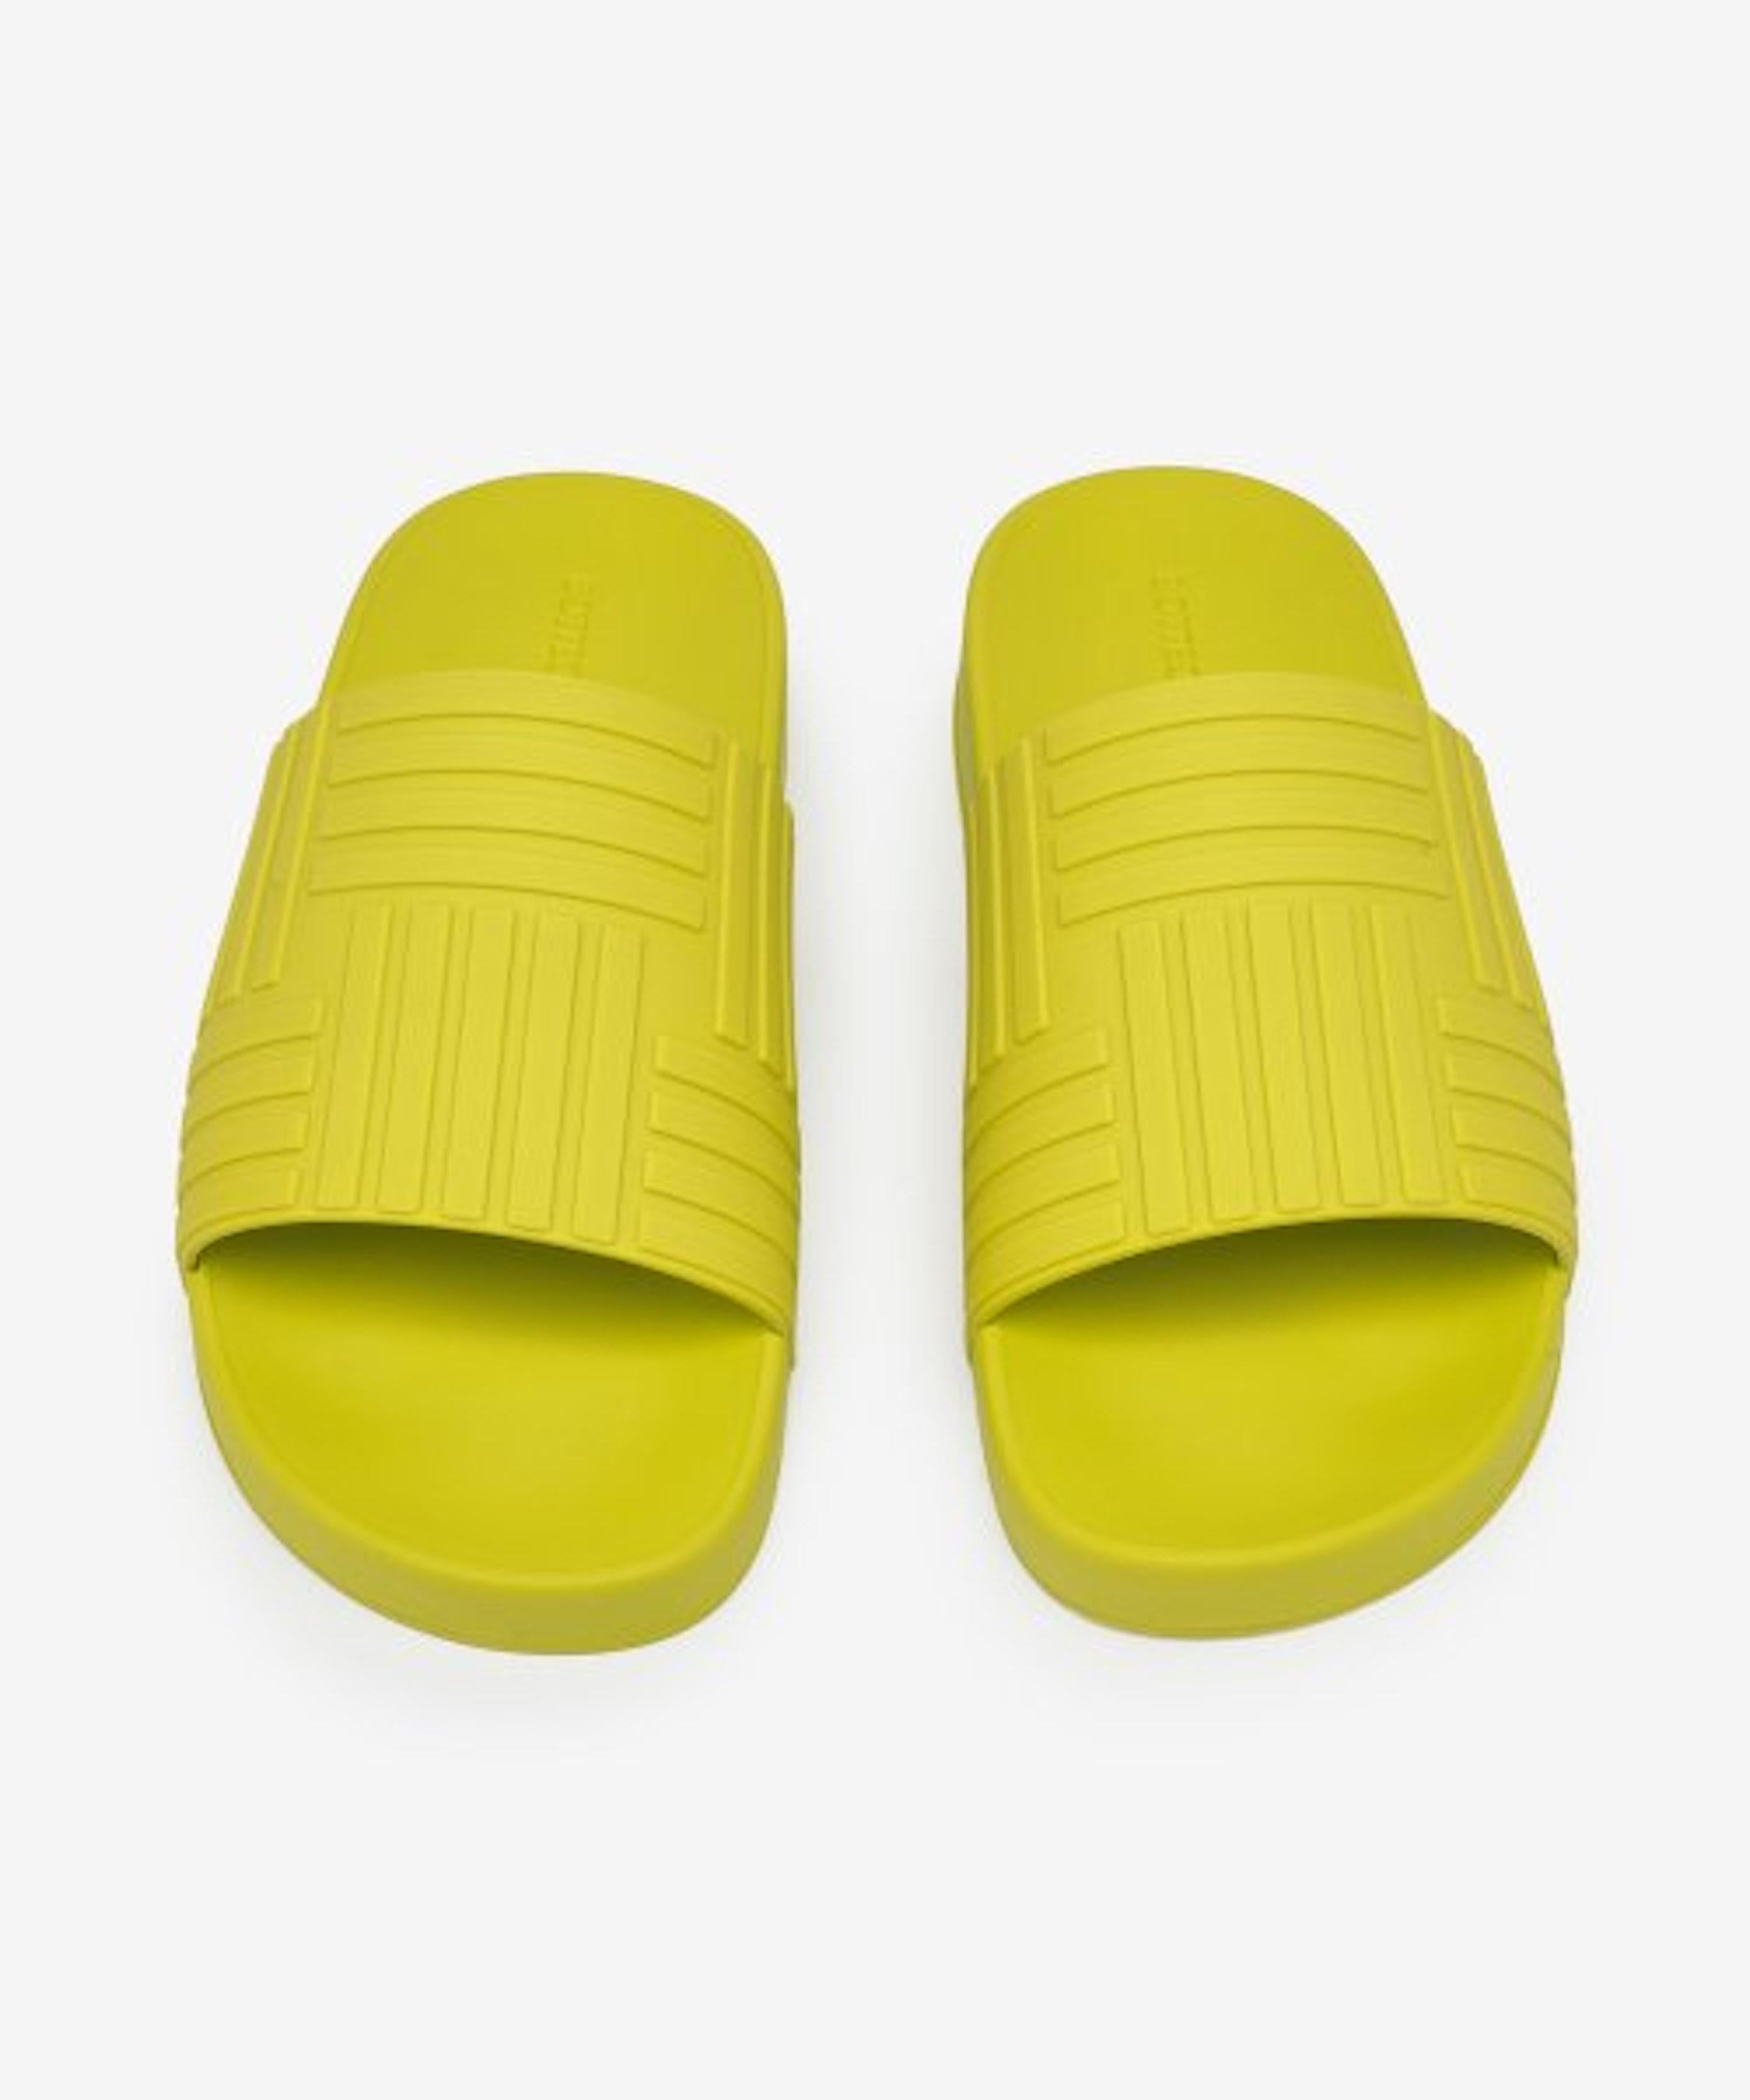 Rubber slip-on sandals in Kiwi green. Graphic pattern embossed at vamp. Logo-embossed molded rubber footbed. Treaded rubber sole. Made in Italy.
Brand new, never worn, comes in all original packaging.